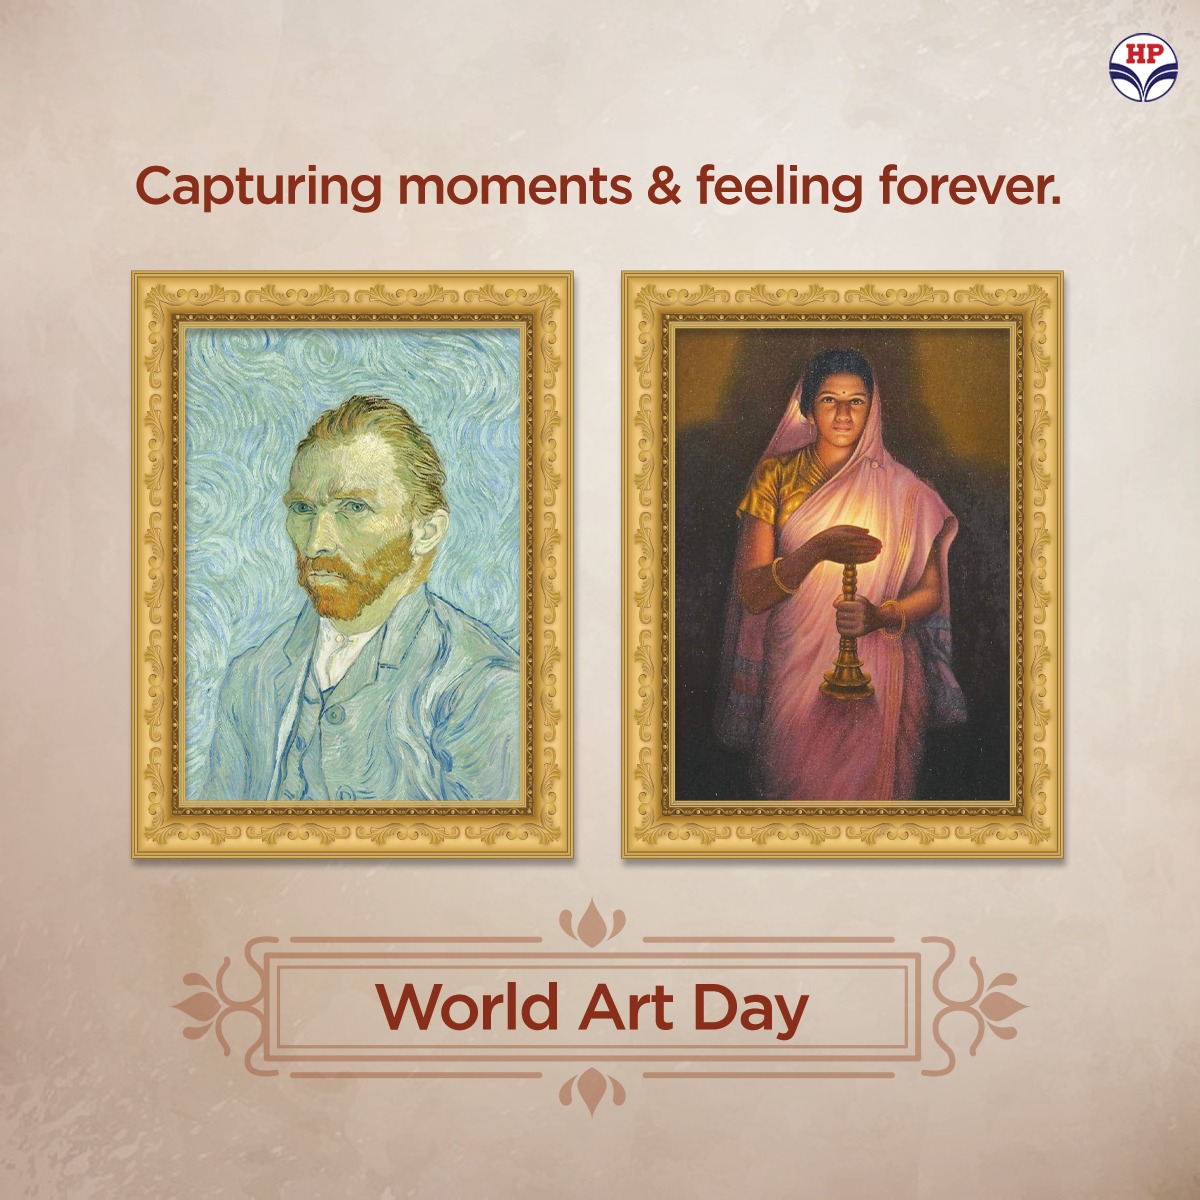 Happy #WorldArtDay! Let's celebrate the joy of creating and experiencing art together. #HPRetail #MeraHPPump @HPCL